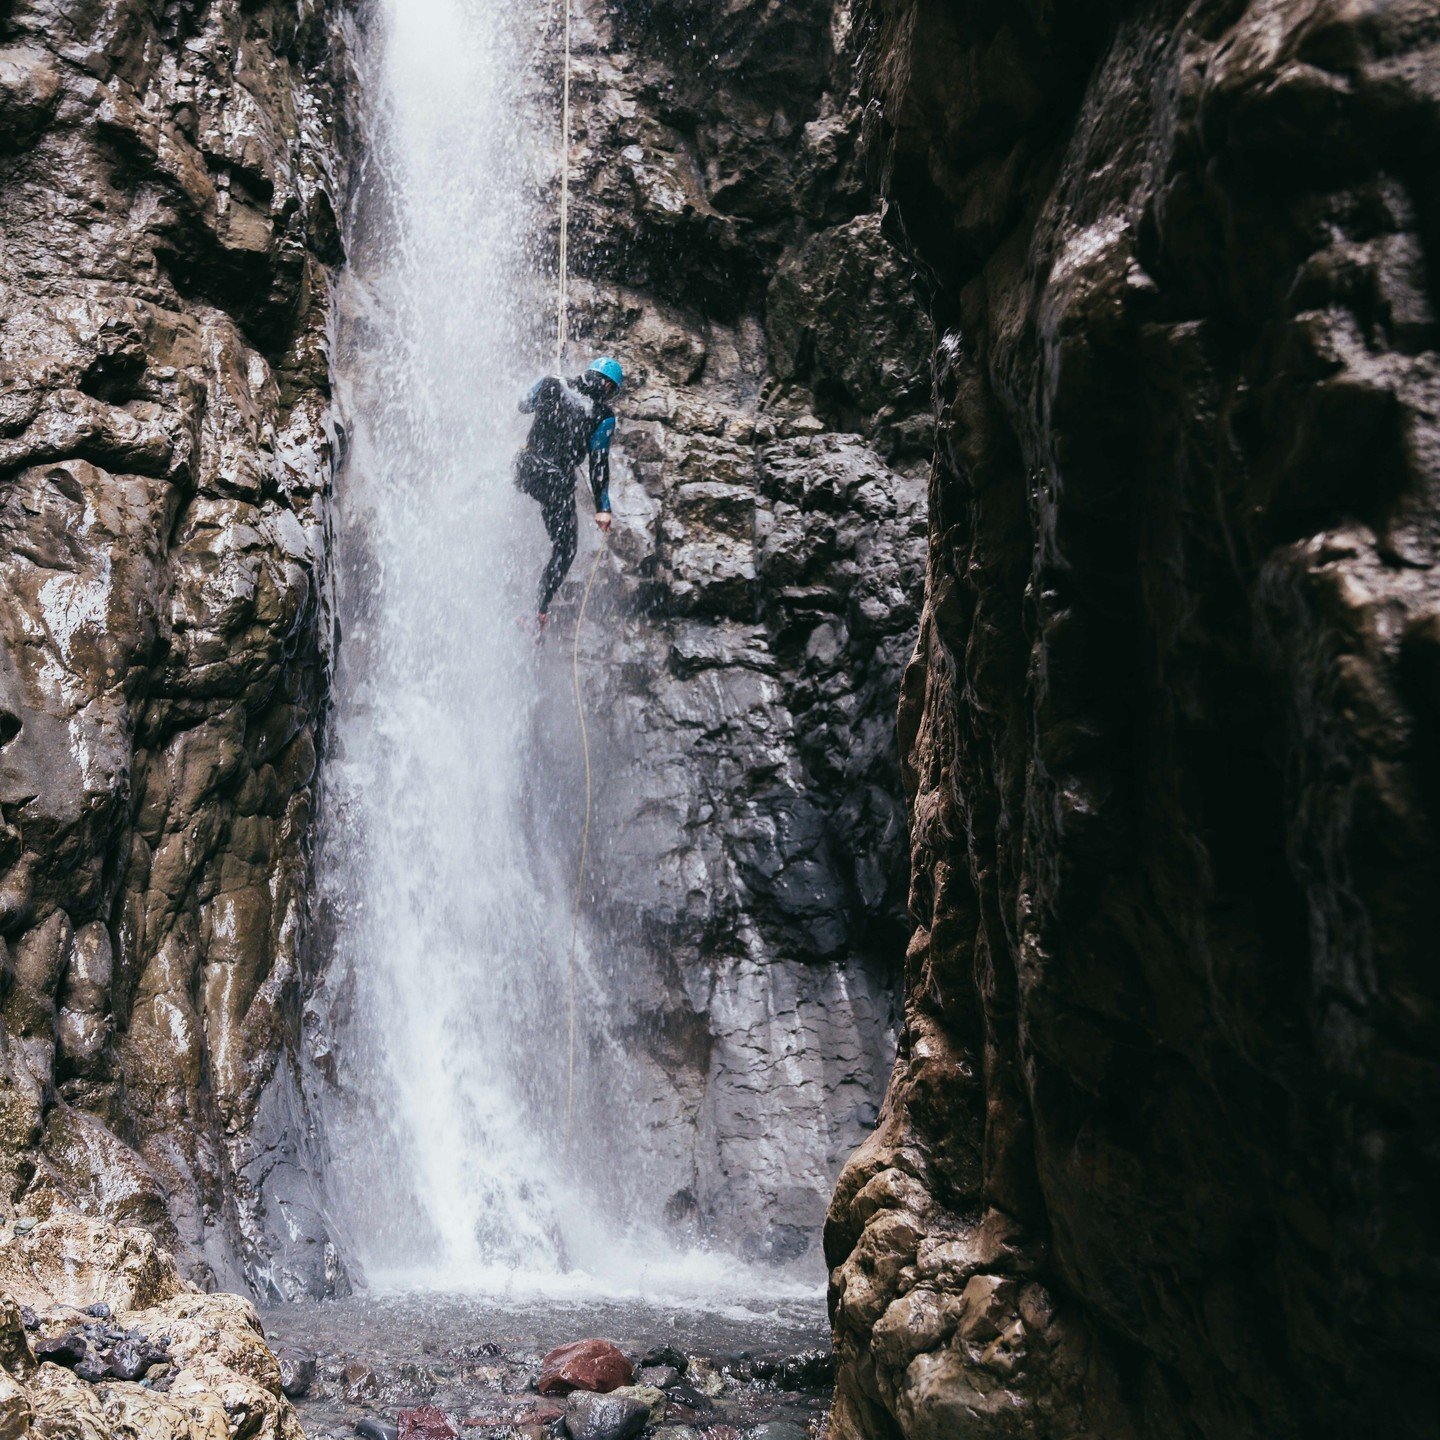 Repelling down a waterfall